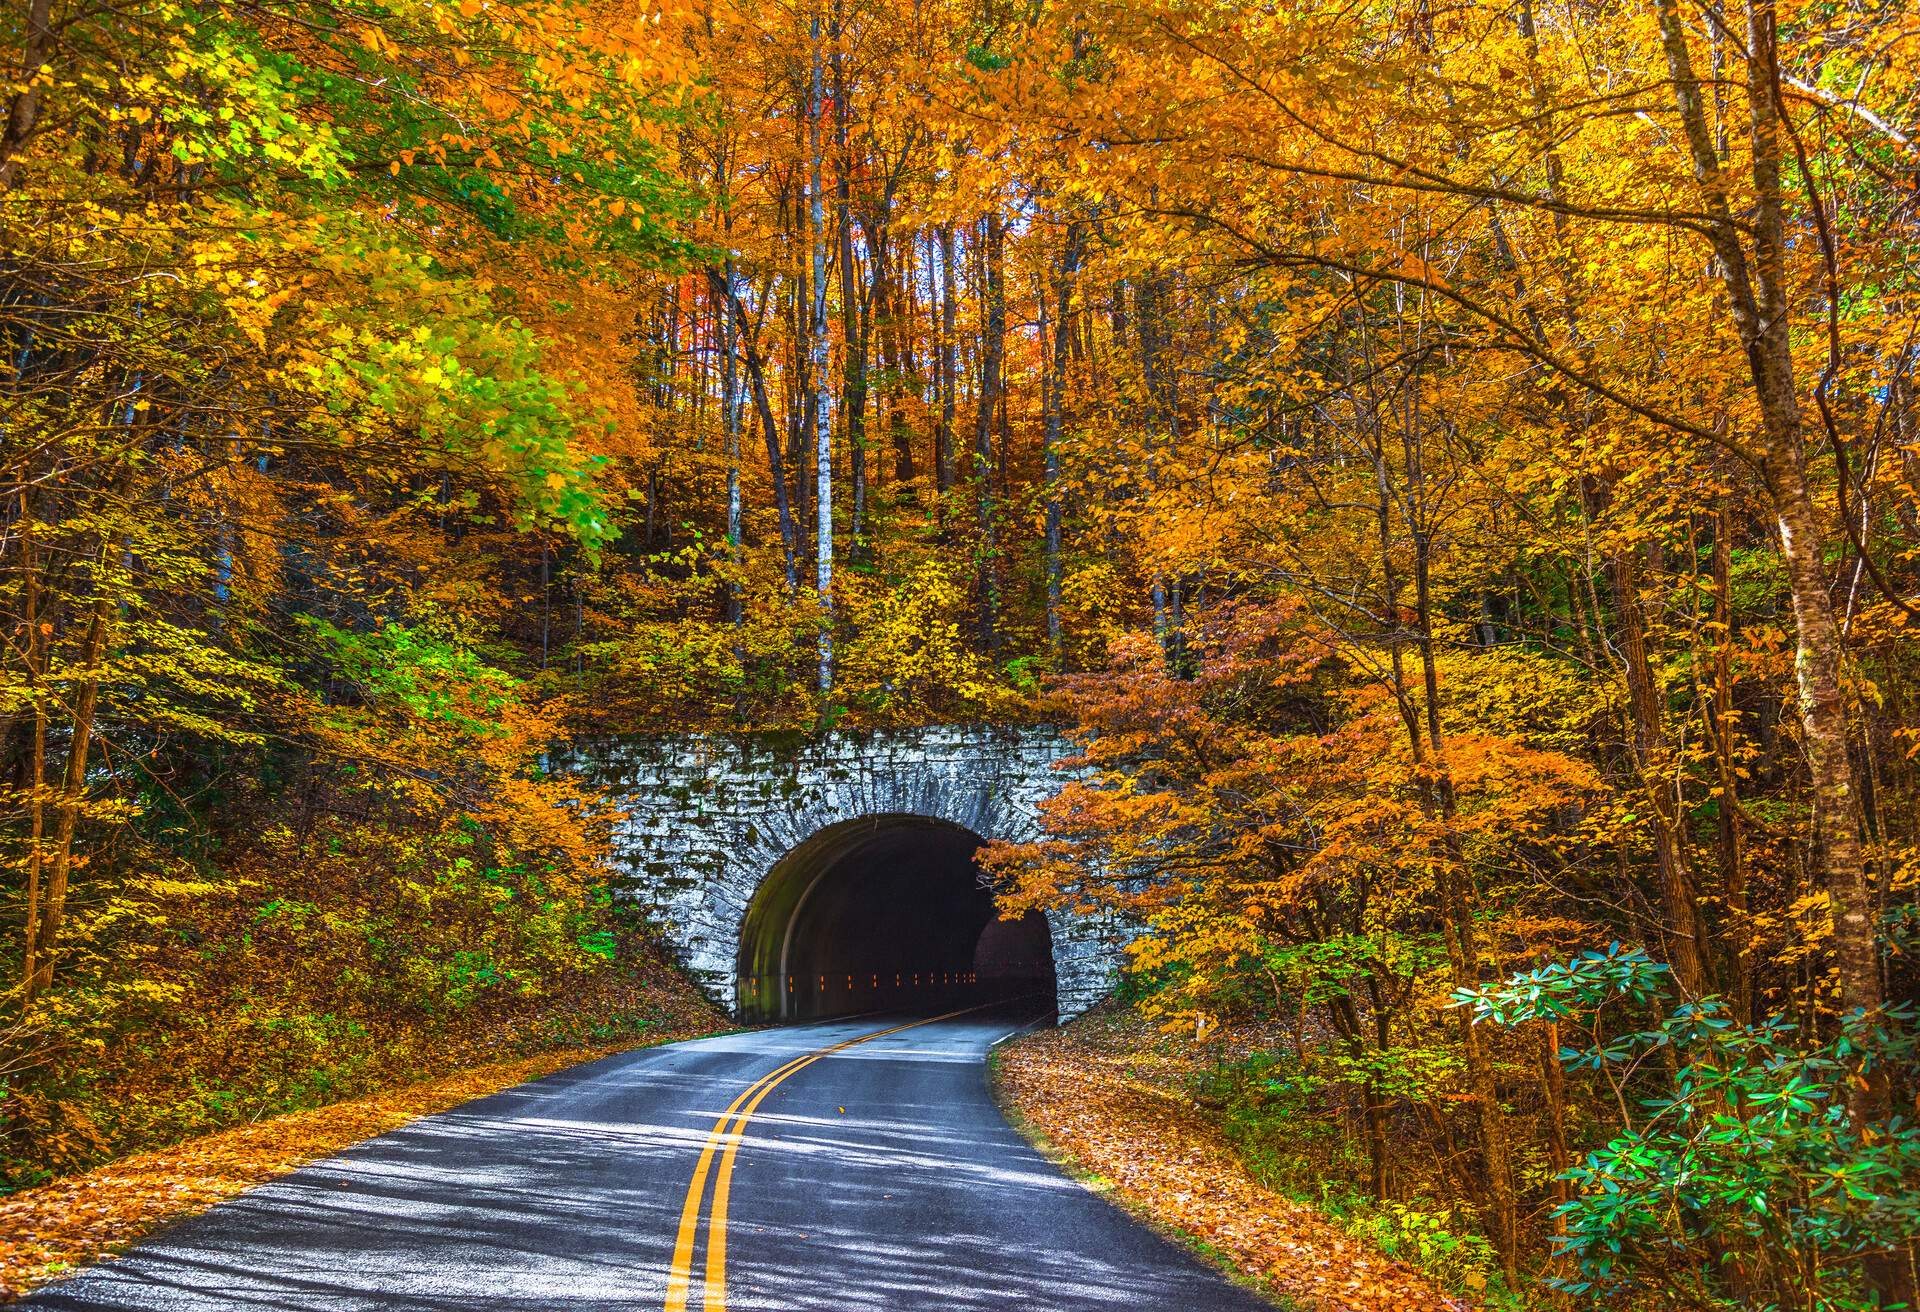 Road leading to a stone tunnel entrance surrounded by trees in bright yellow, orange, and red colours.